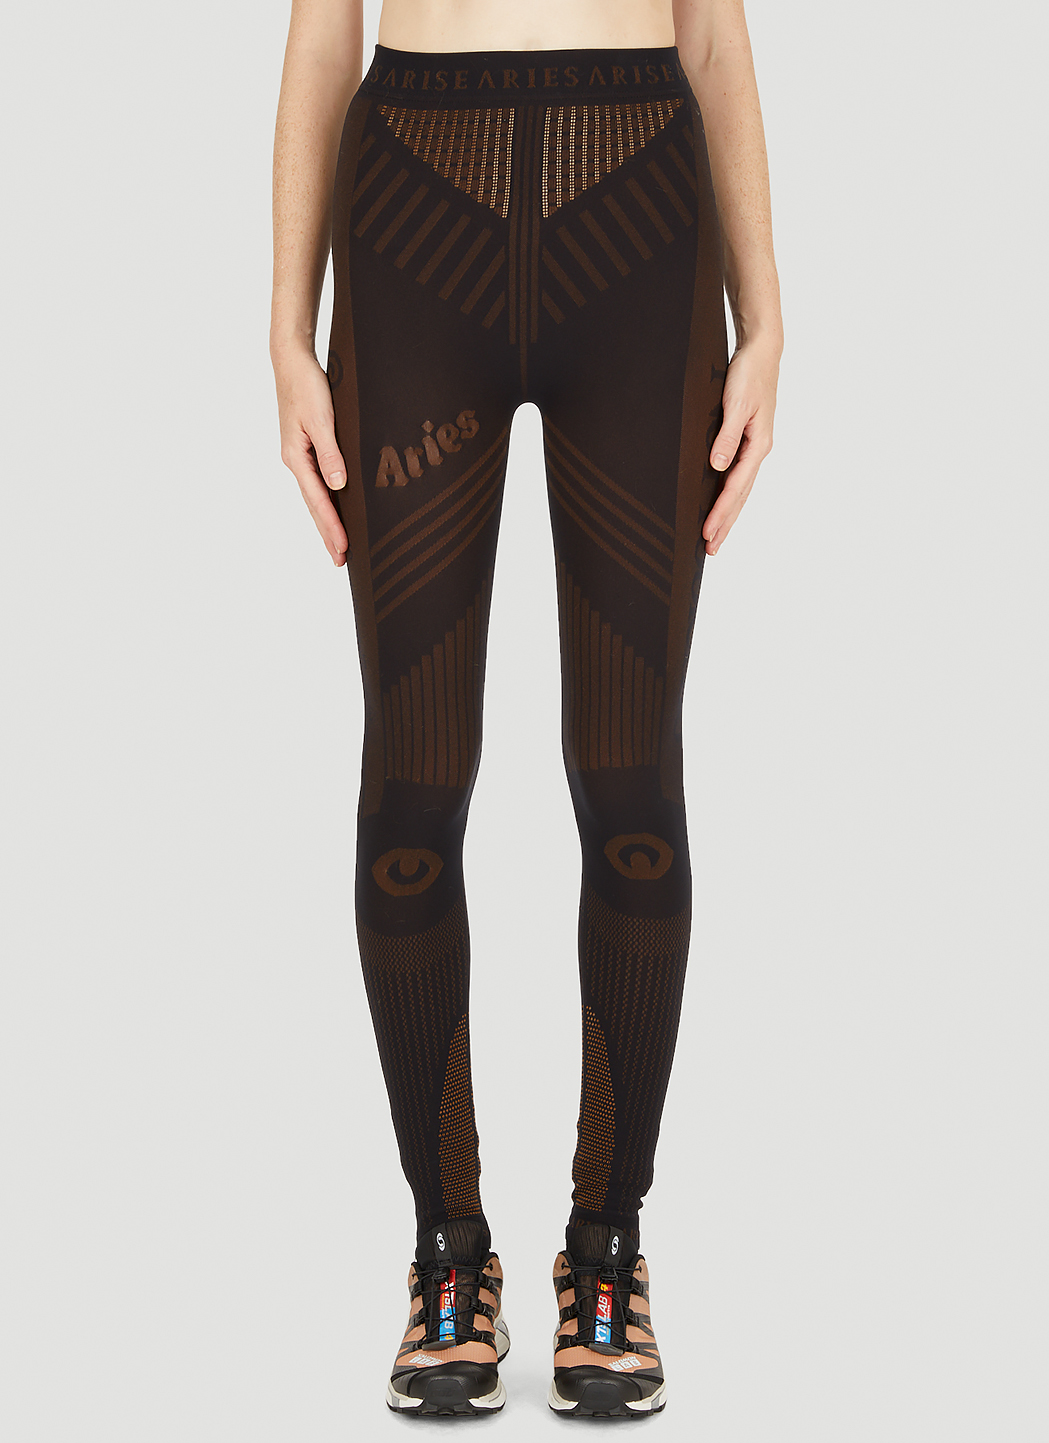 ARIES WOMAN TRAITS Leggings for Sale by NAUTIZE